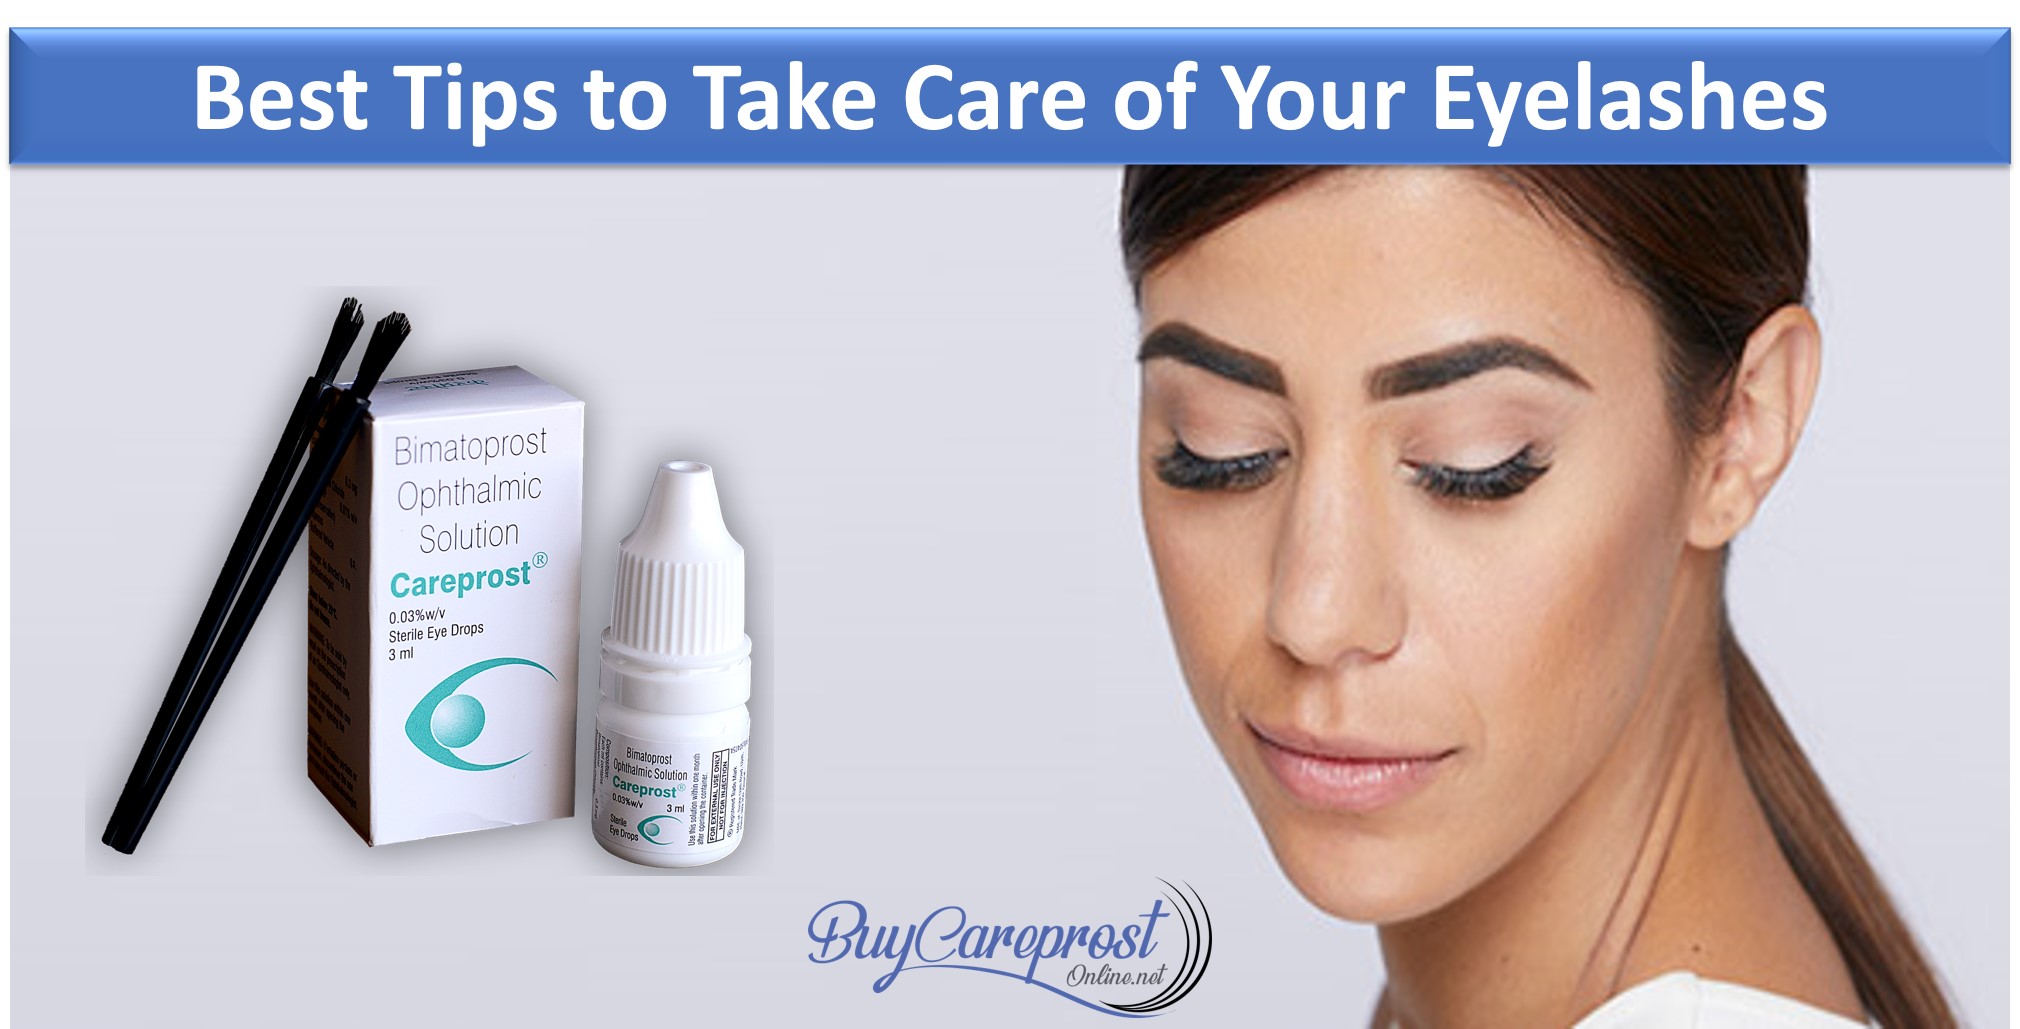 Best tips to take care of your eyelashes